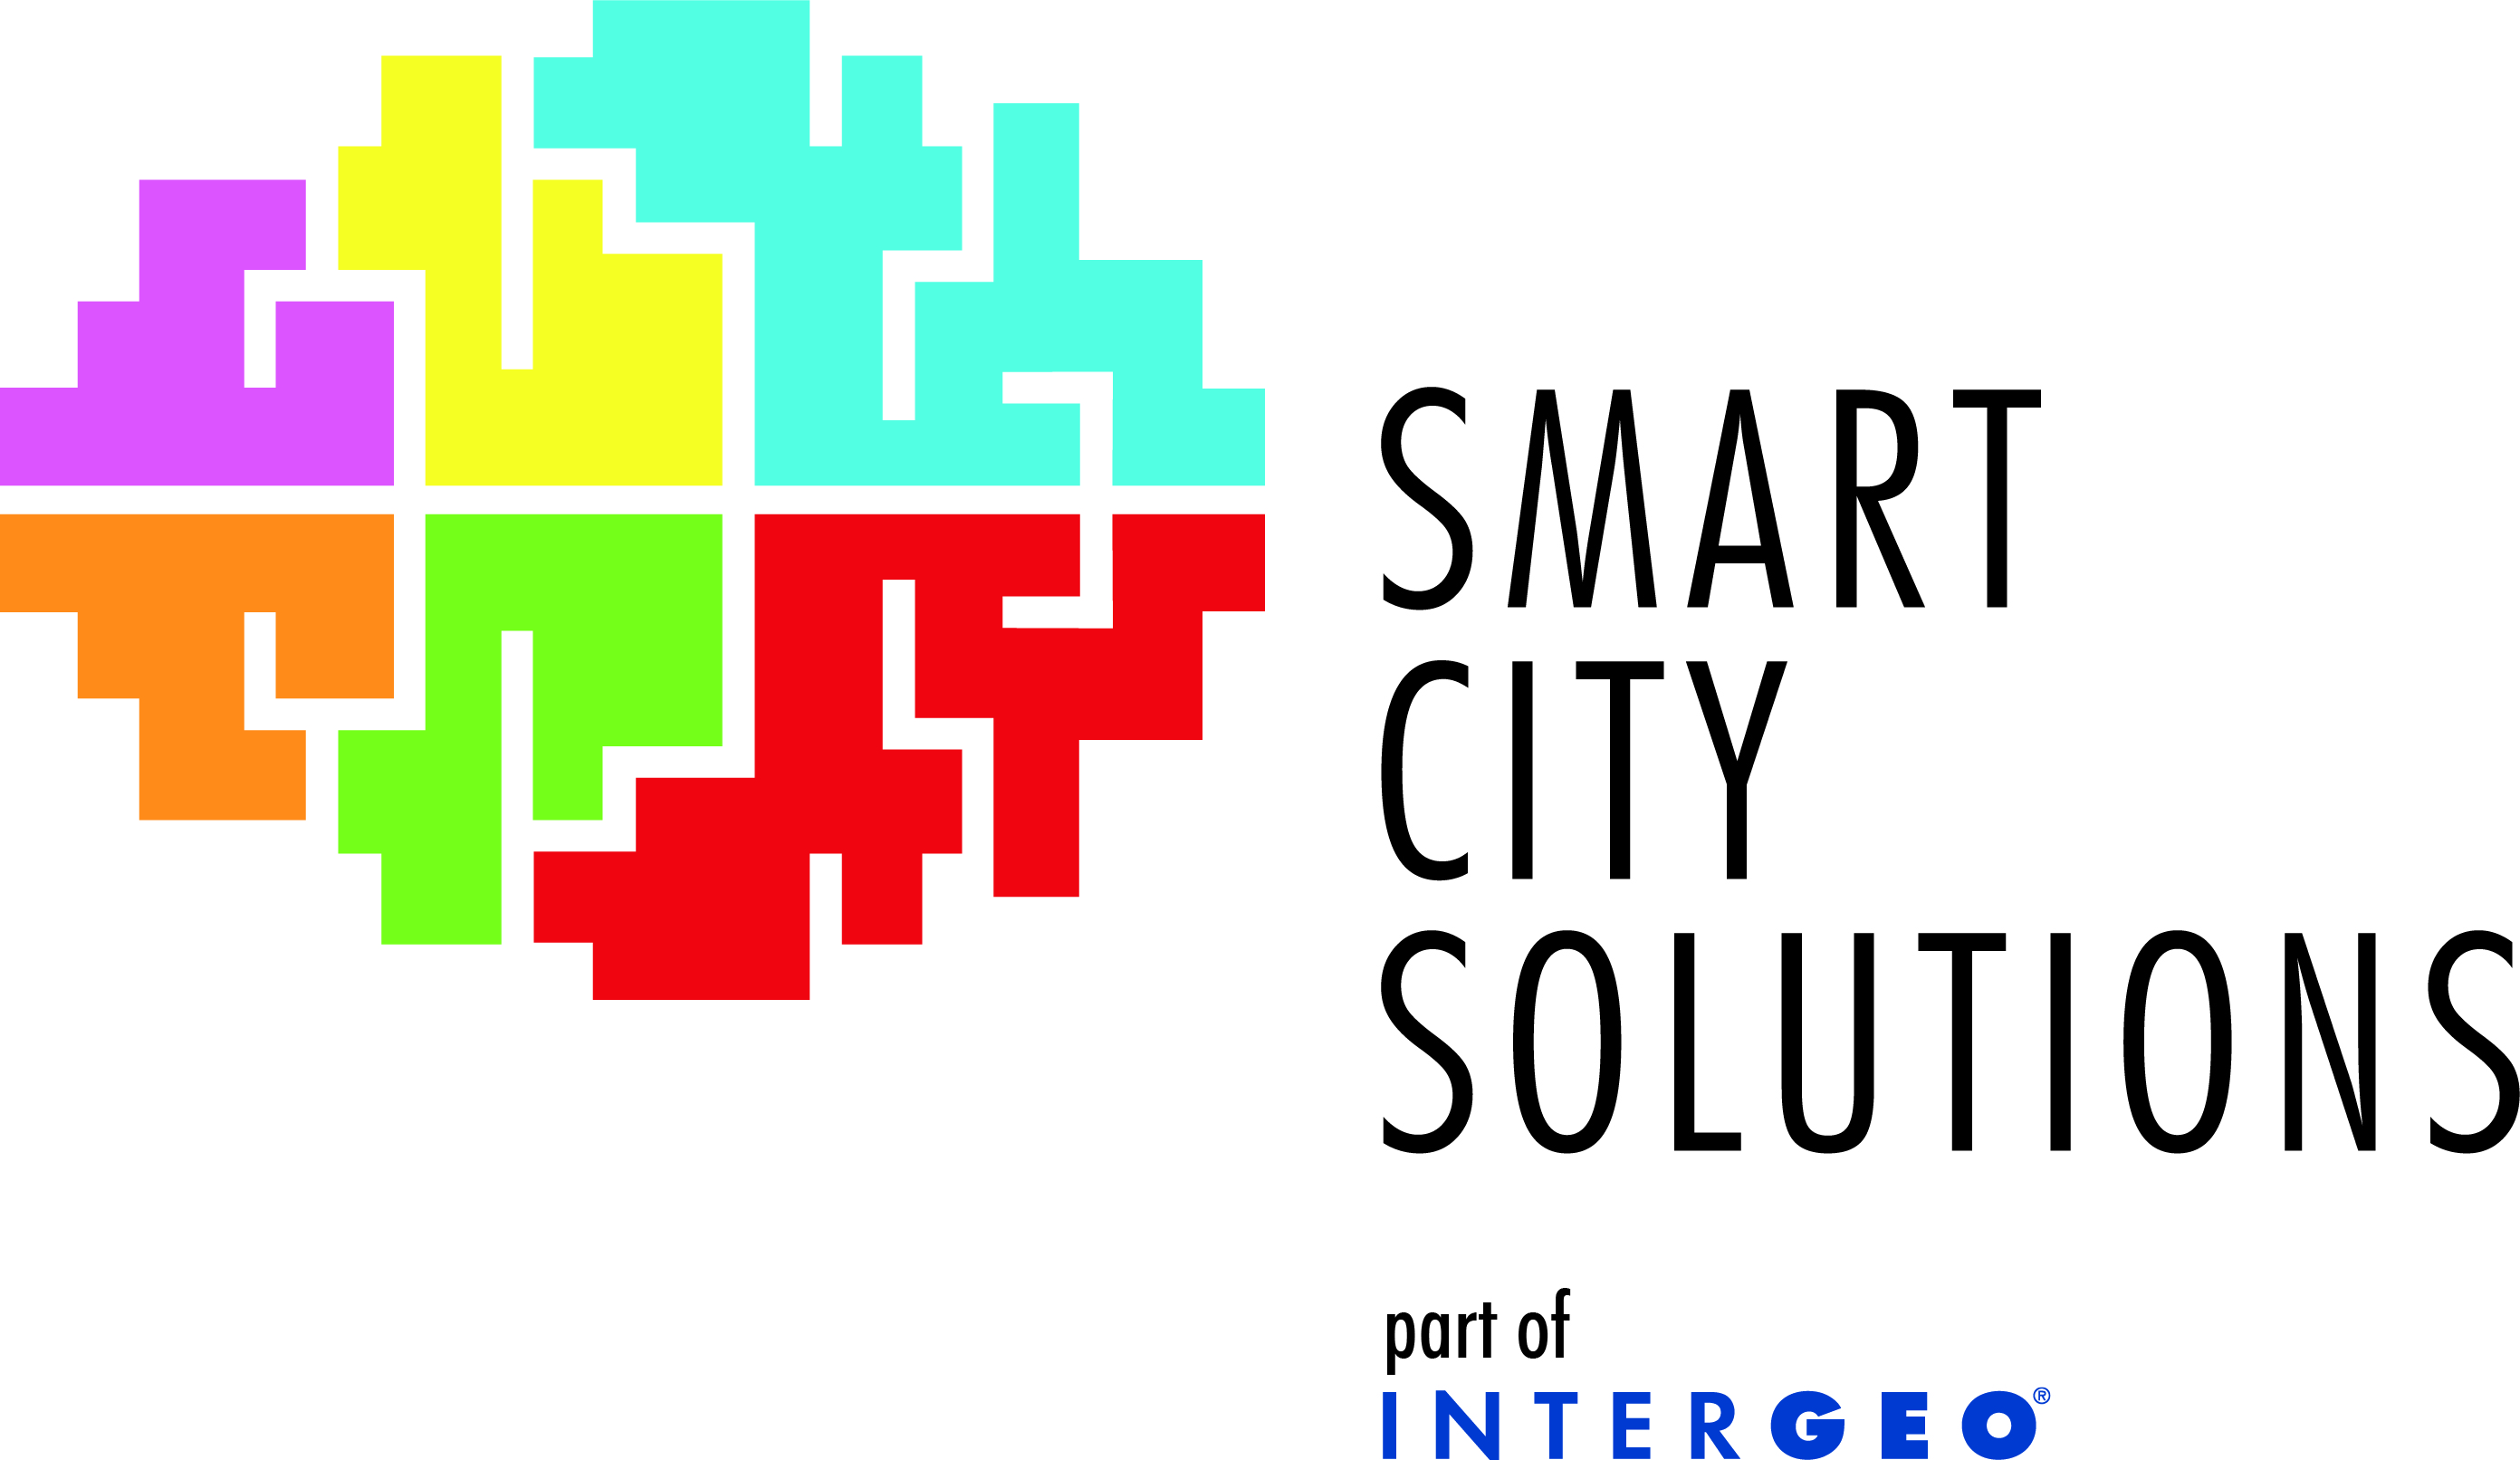 SMART CITY SOLUTIONS Trade show + Conference, part of INTERGEO 